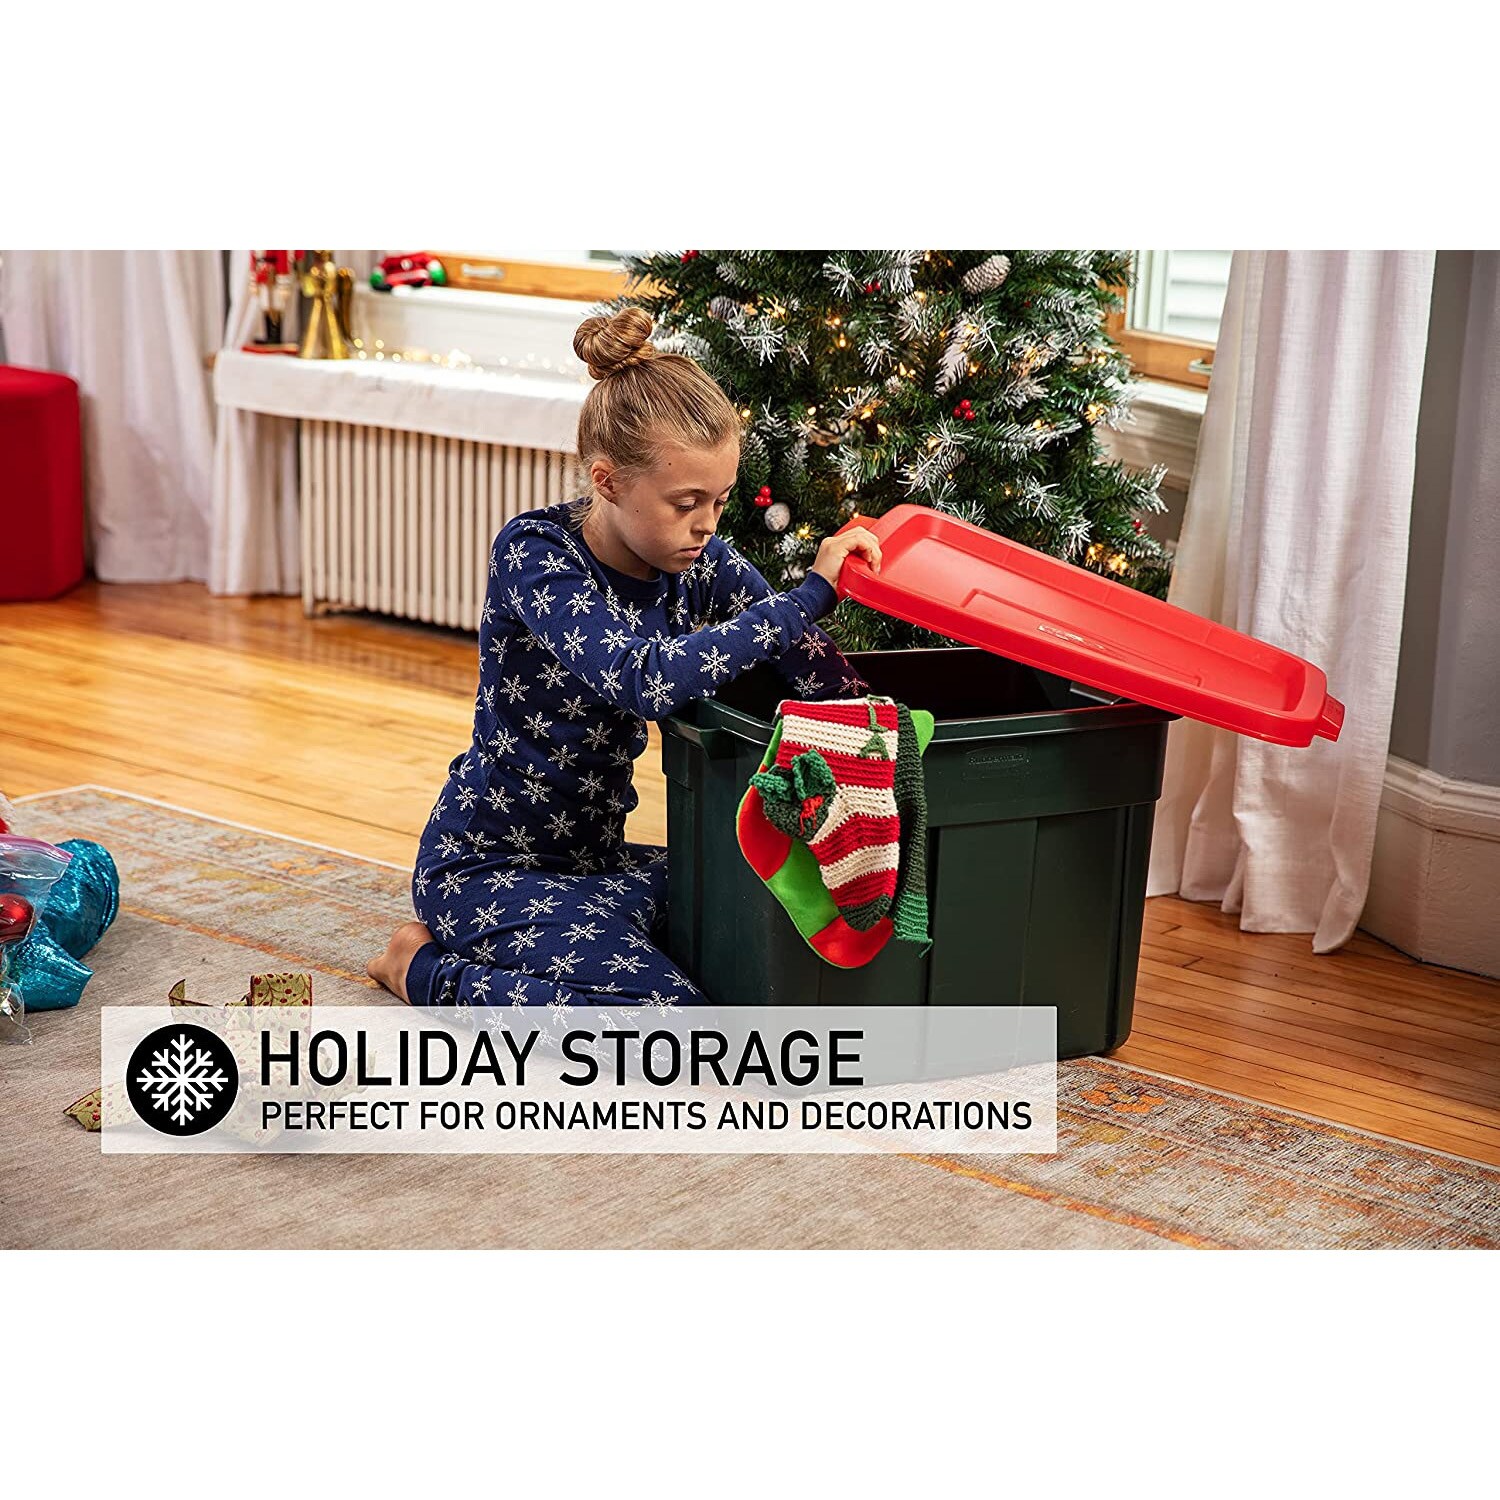 https://ak1.ostkcdn.com/images/products/is/images/direct/e50323b9b126f5c8bd96bab8fa226f369227d25f/Rubbermaid-Roughneck-18-Gal-Plastic-Holiday-Storage-Tote%2C-Green-and-Red-%286-Pack%29.jpg